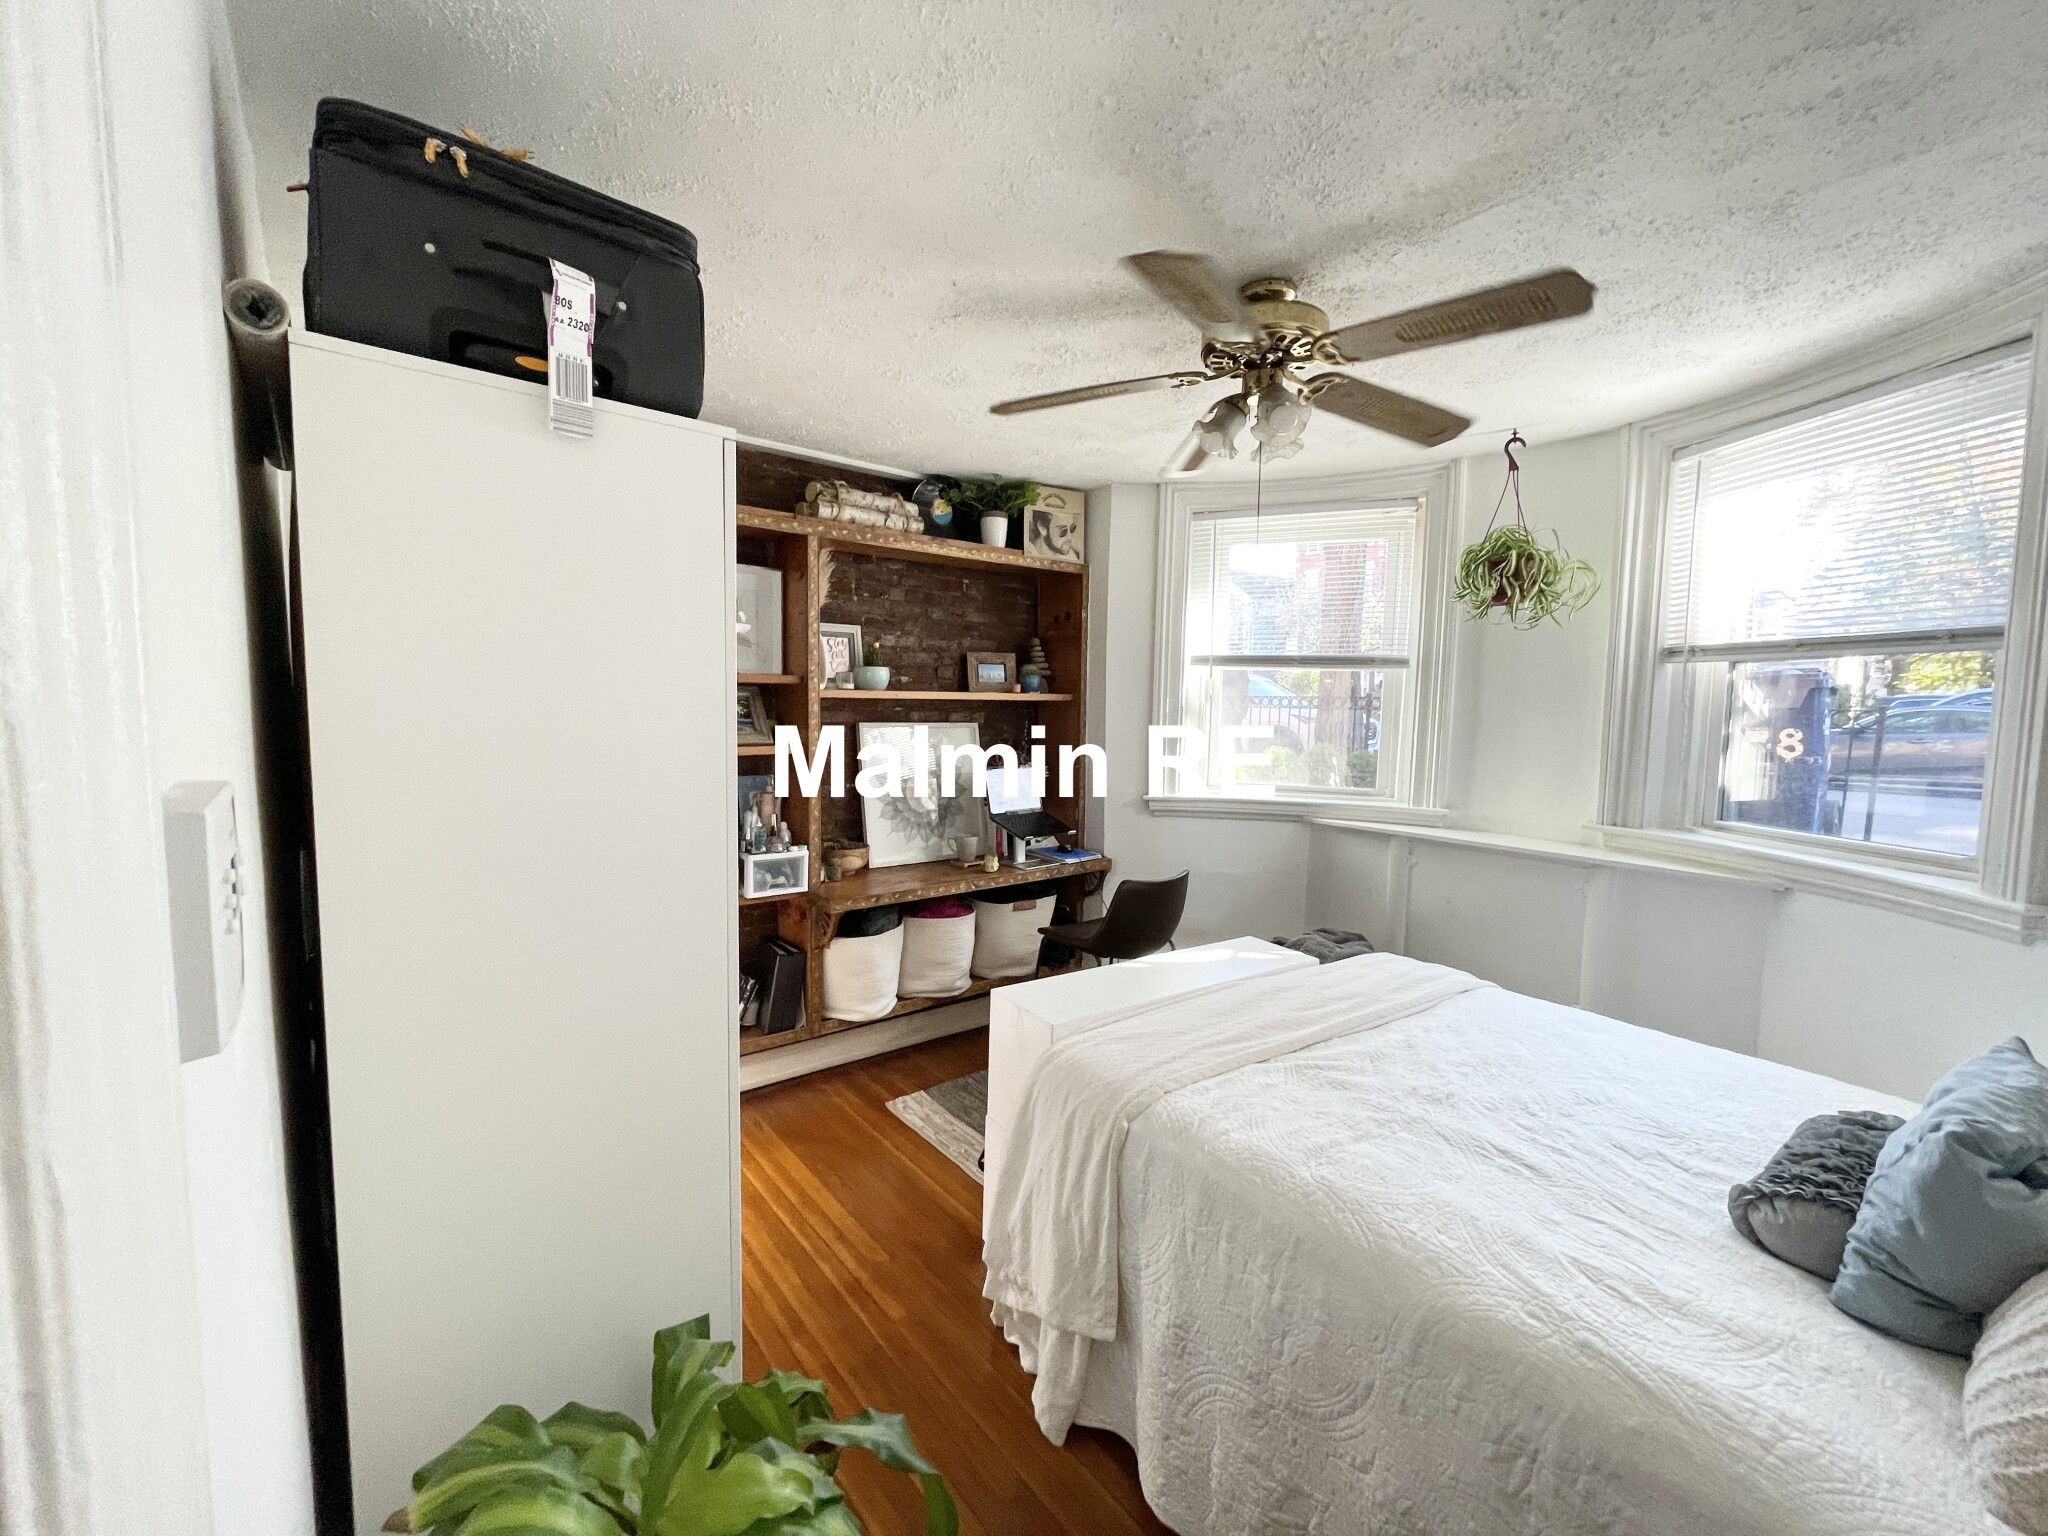 Photos of apartment on East 4th St.,Boston MA 02127